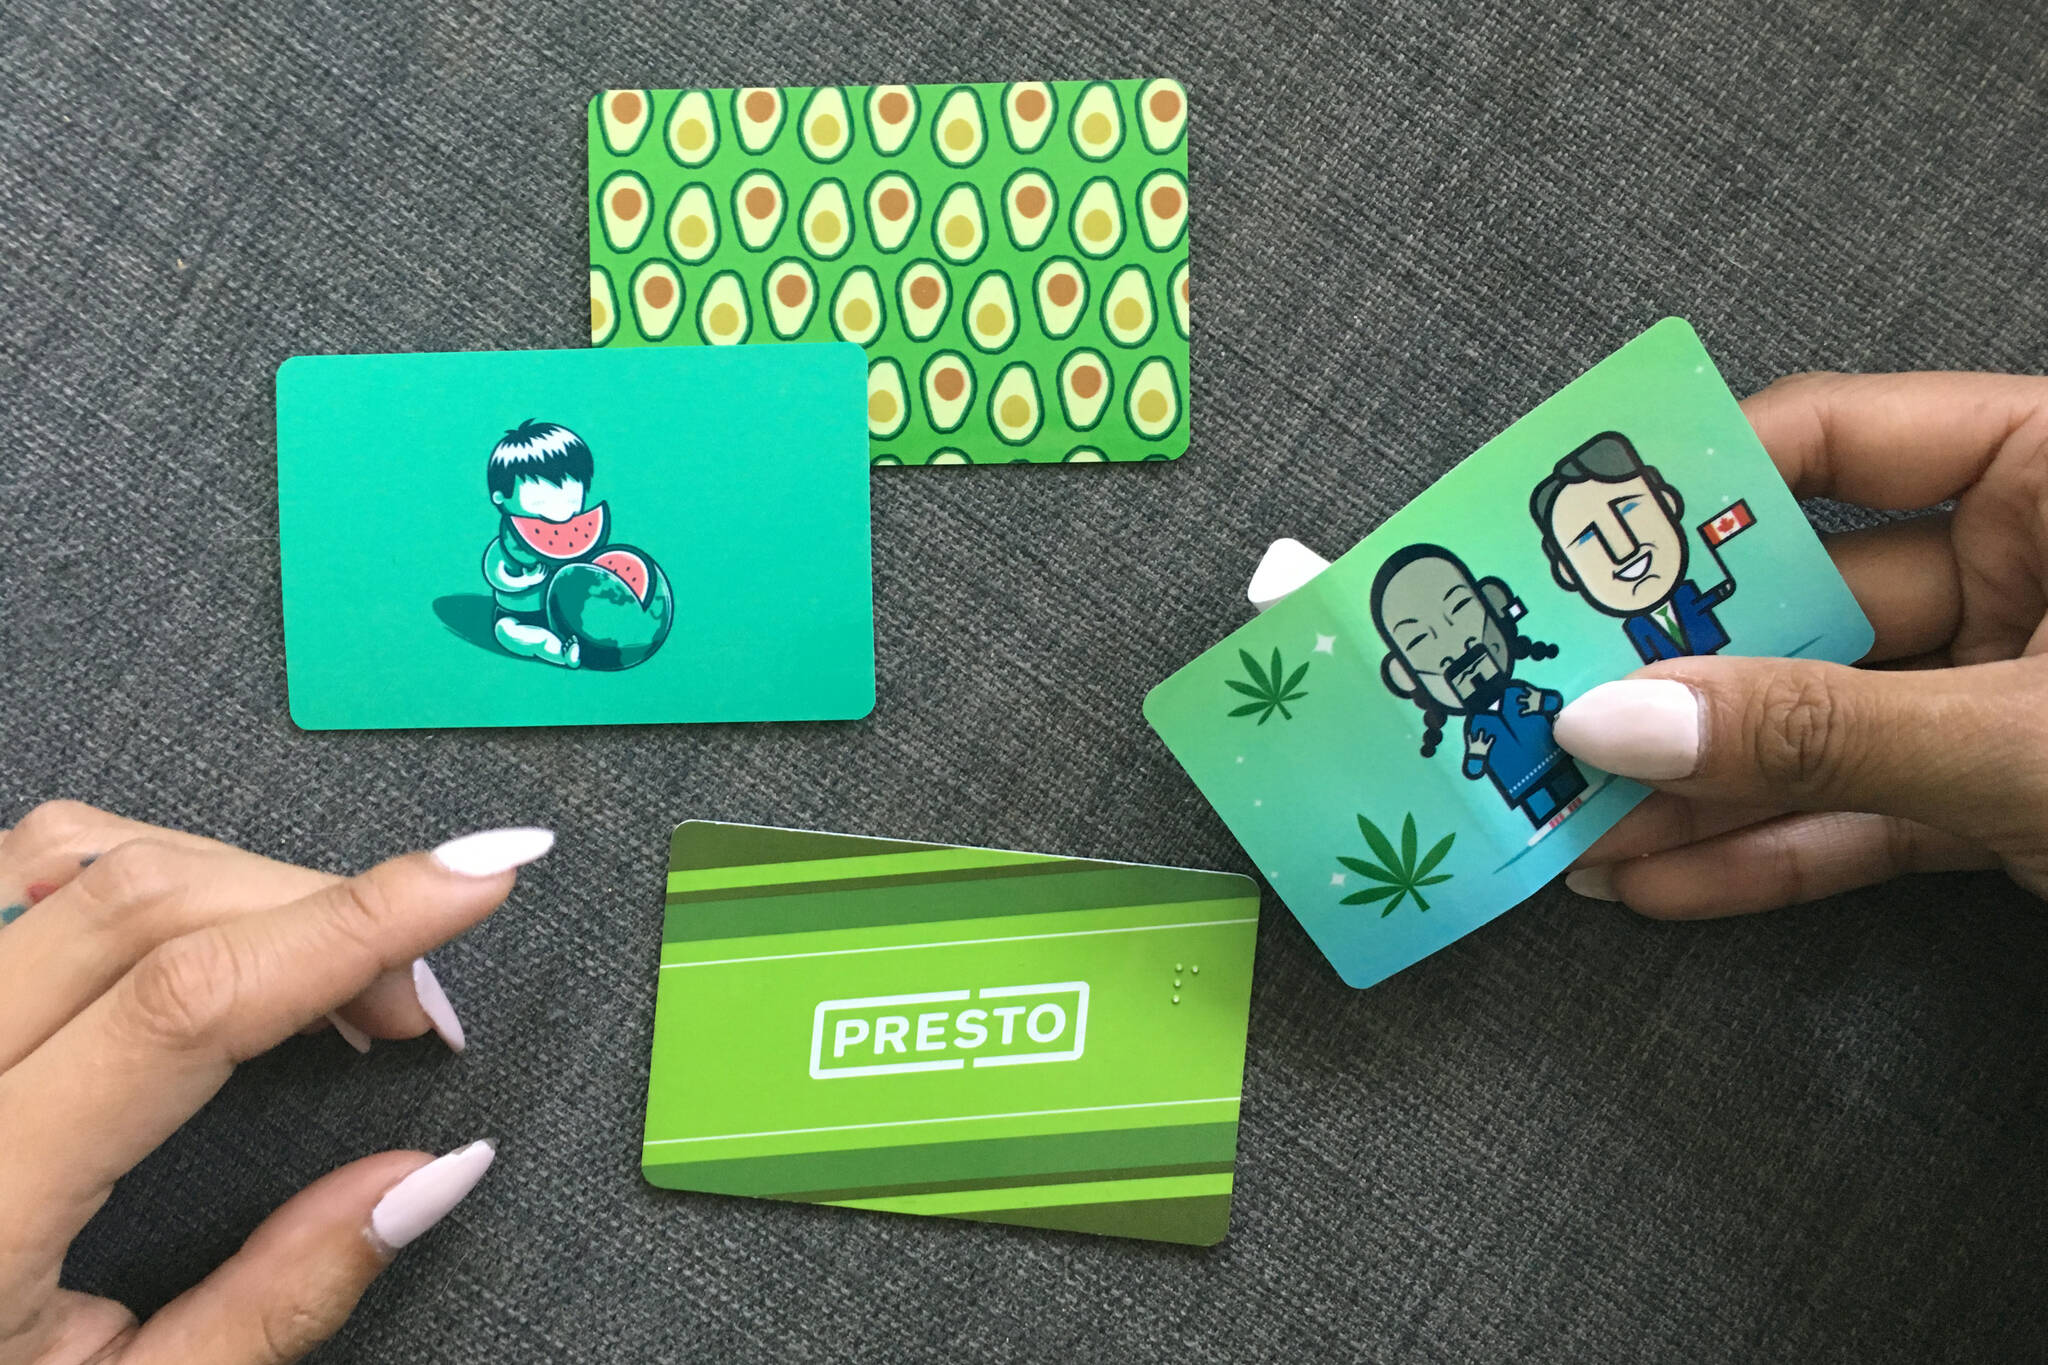 toronto-startup-lets-you-customize-your-presto-card